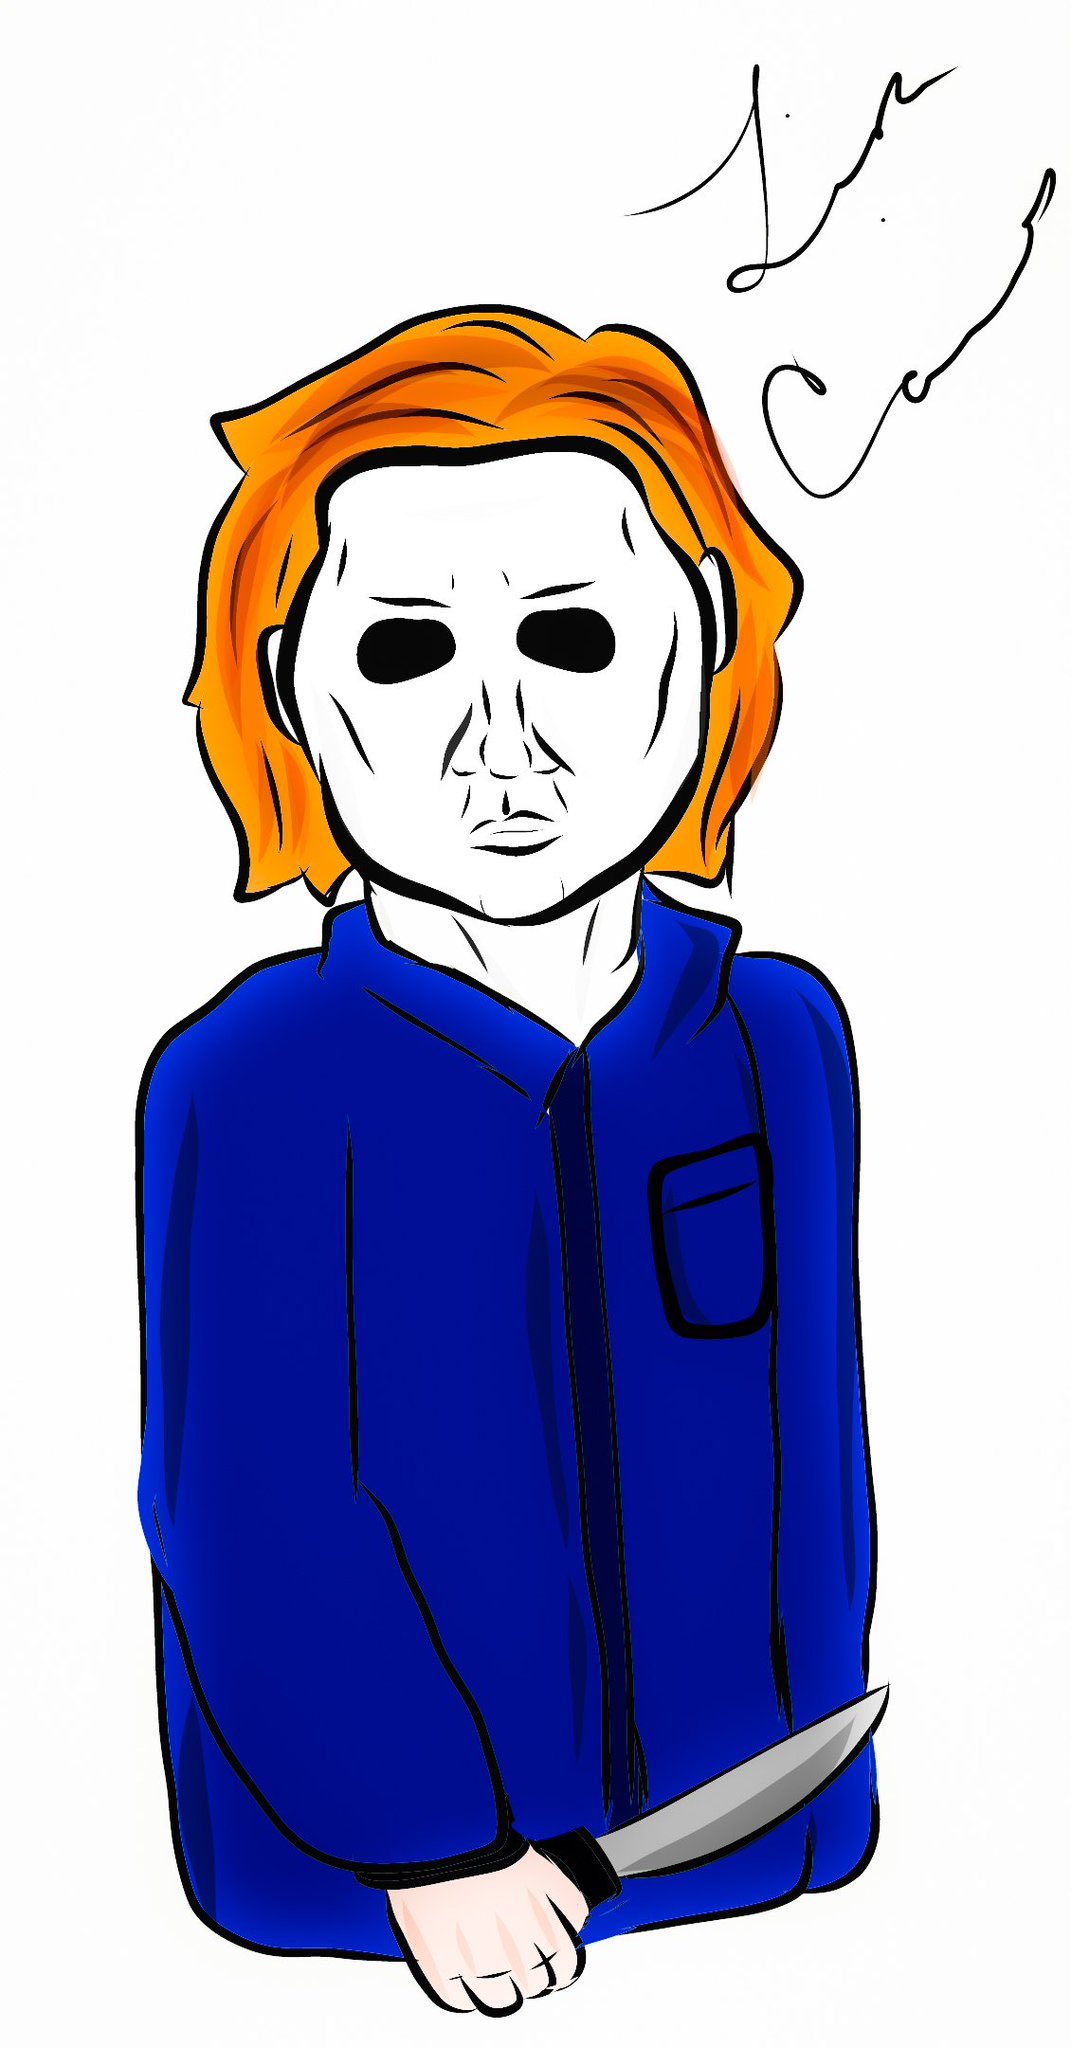 Lisa Caines drawing of Craig as Michael Myers